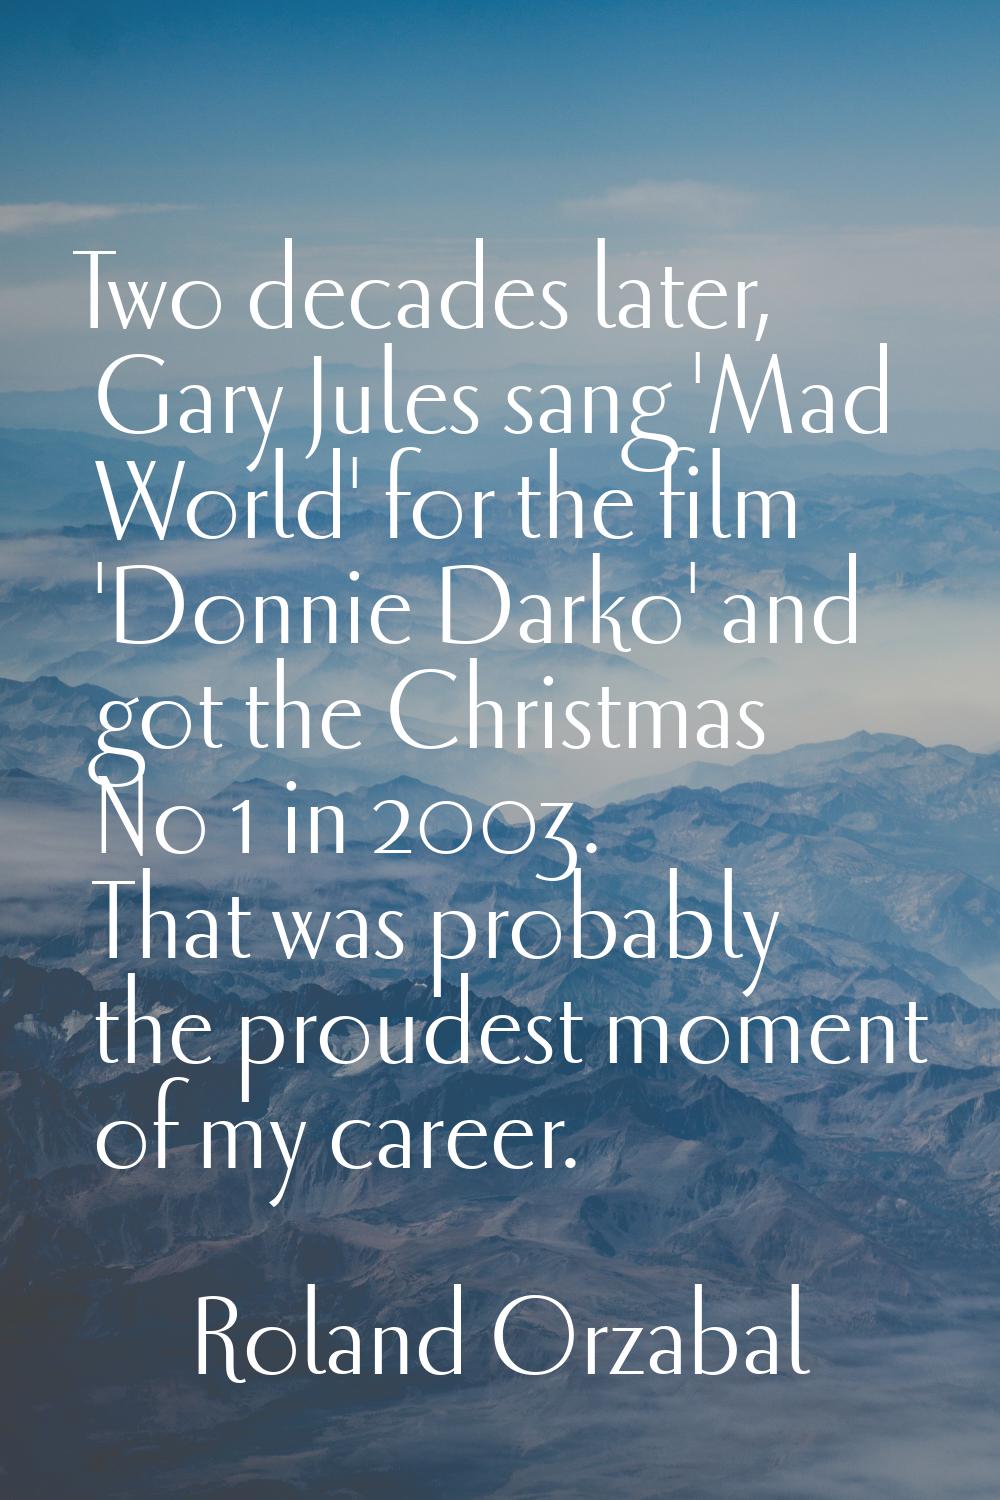 Two decades later, Gary Jules sang 'Mad World' for the film 'Donnie Darko' and got the Christmas No